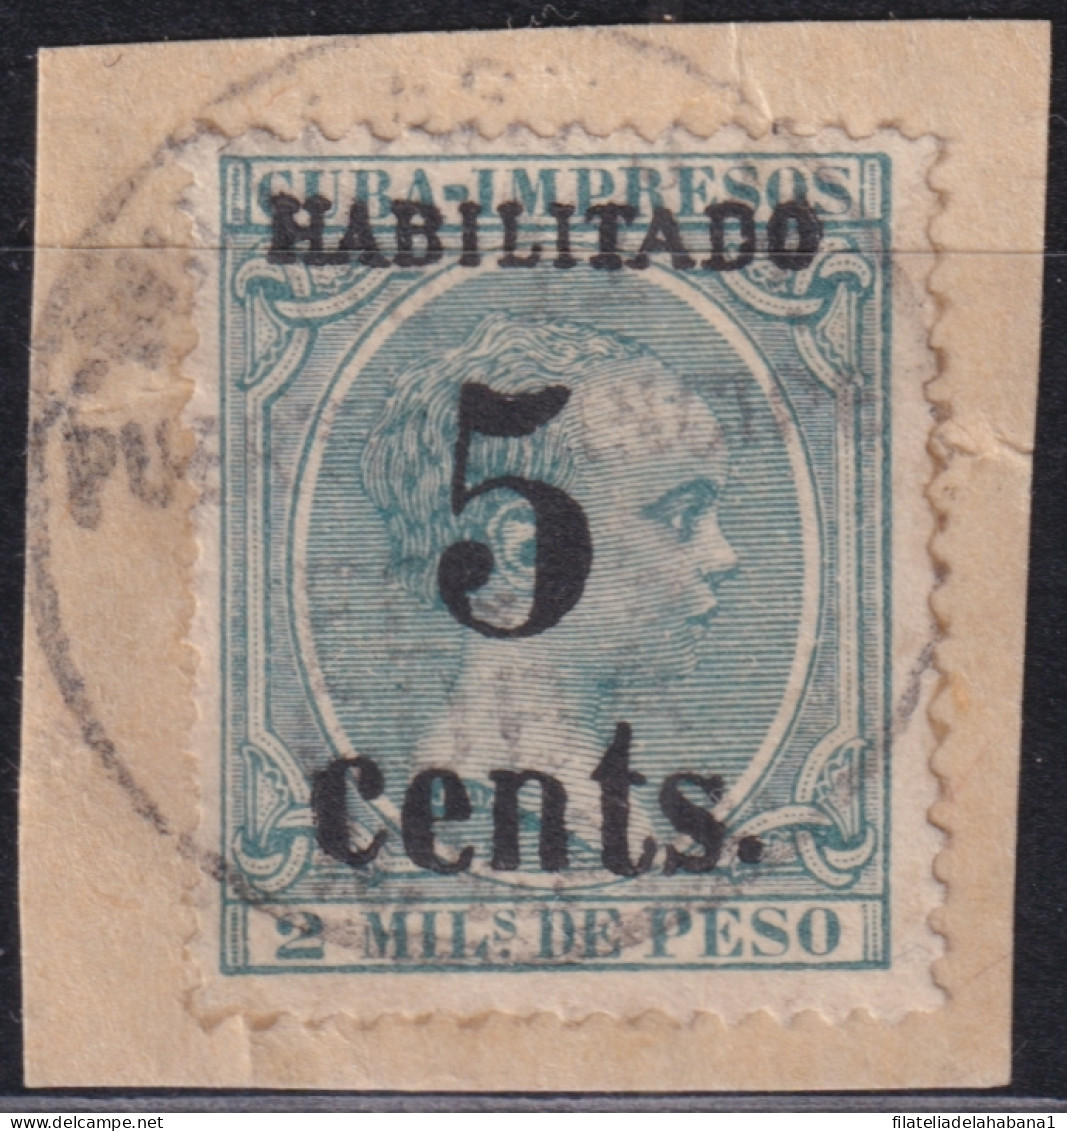 1899-699 CUBA US OCCUPATION PUERTO PRINCIPE 1899 5º ISSUE 5c S. 2mls DANGEROUS FORGERY USED.  - Used Stamps